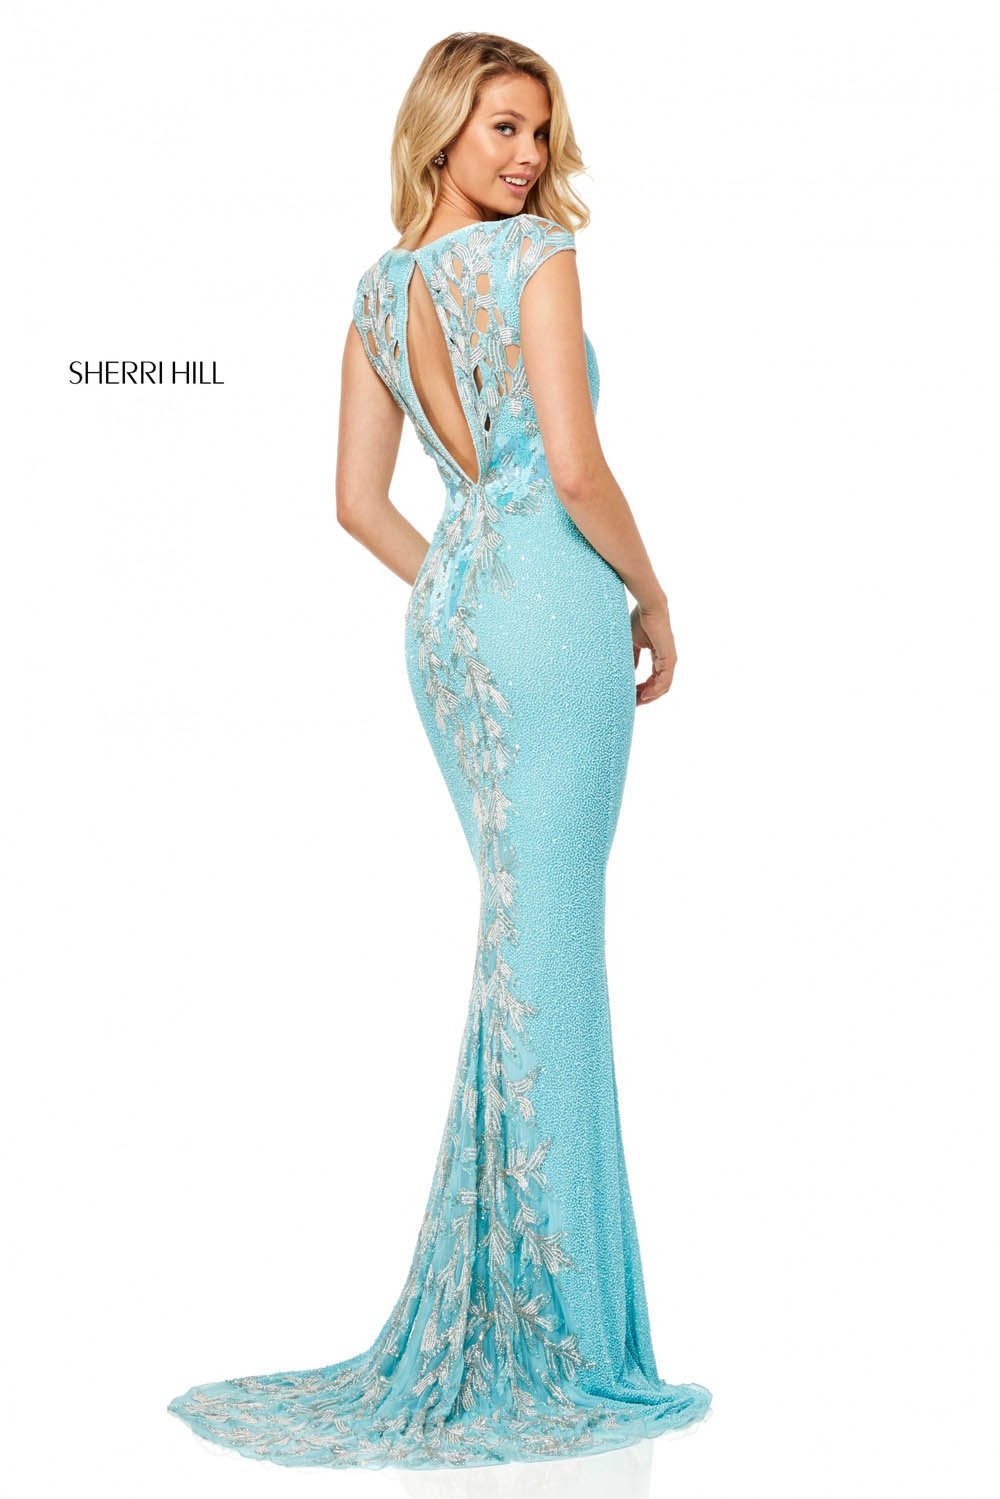 Sherri Hill 52451 dress images in these colors: Ivory Pink, Light Blue, Black Red, Navy Blush.